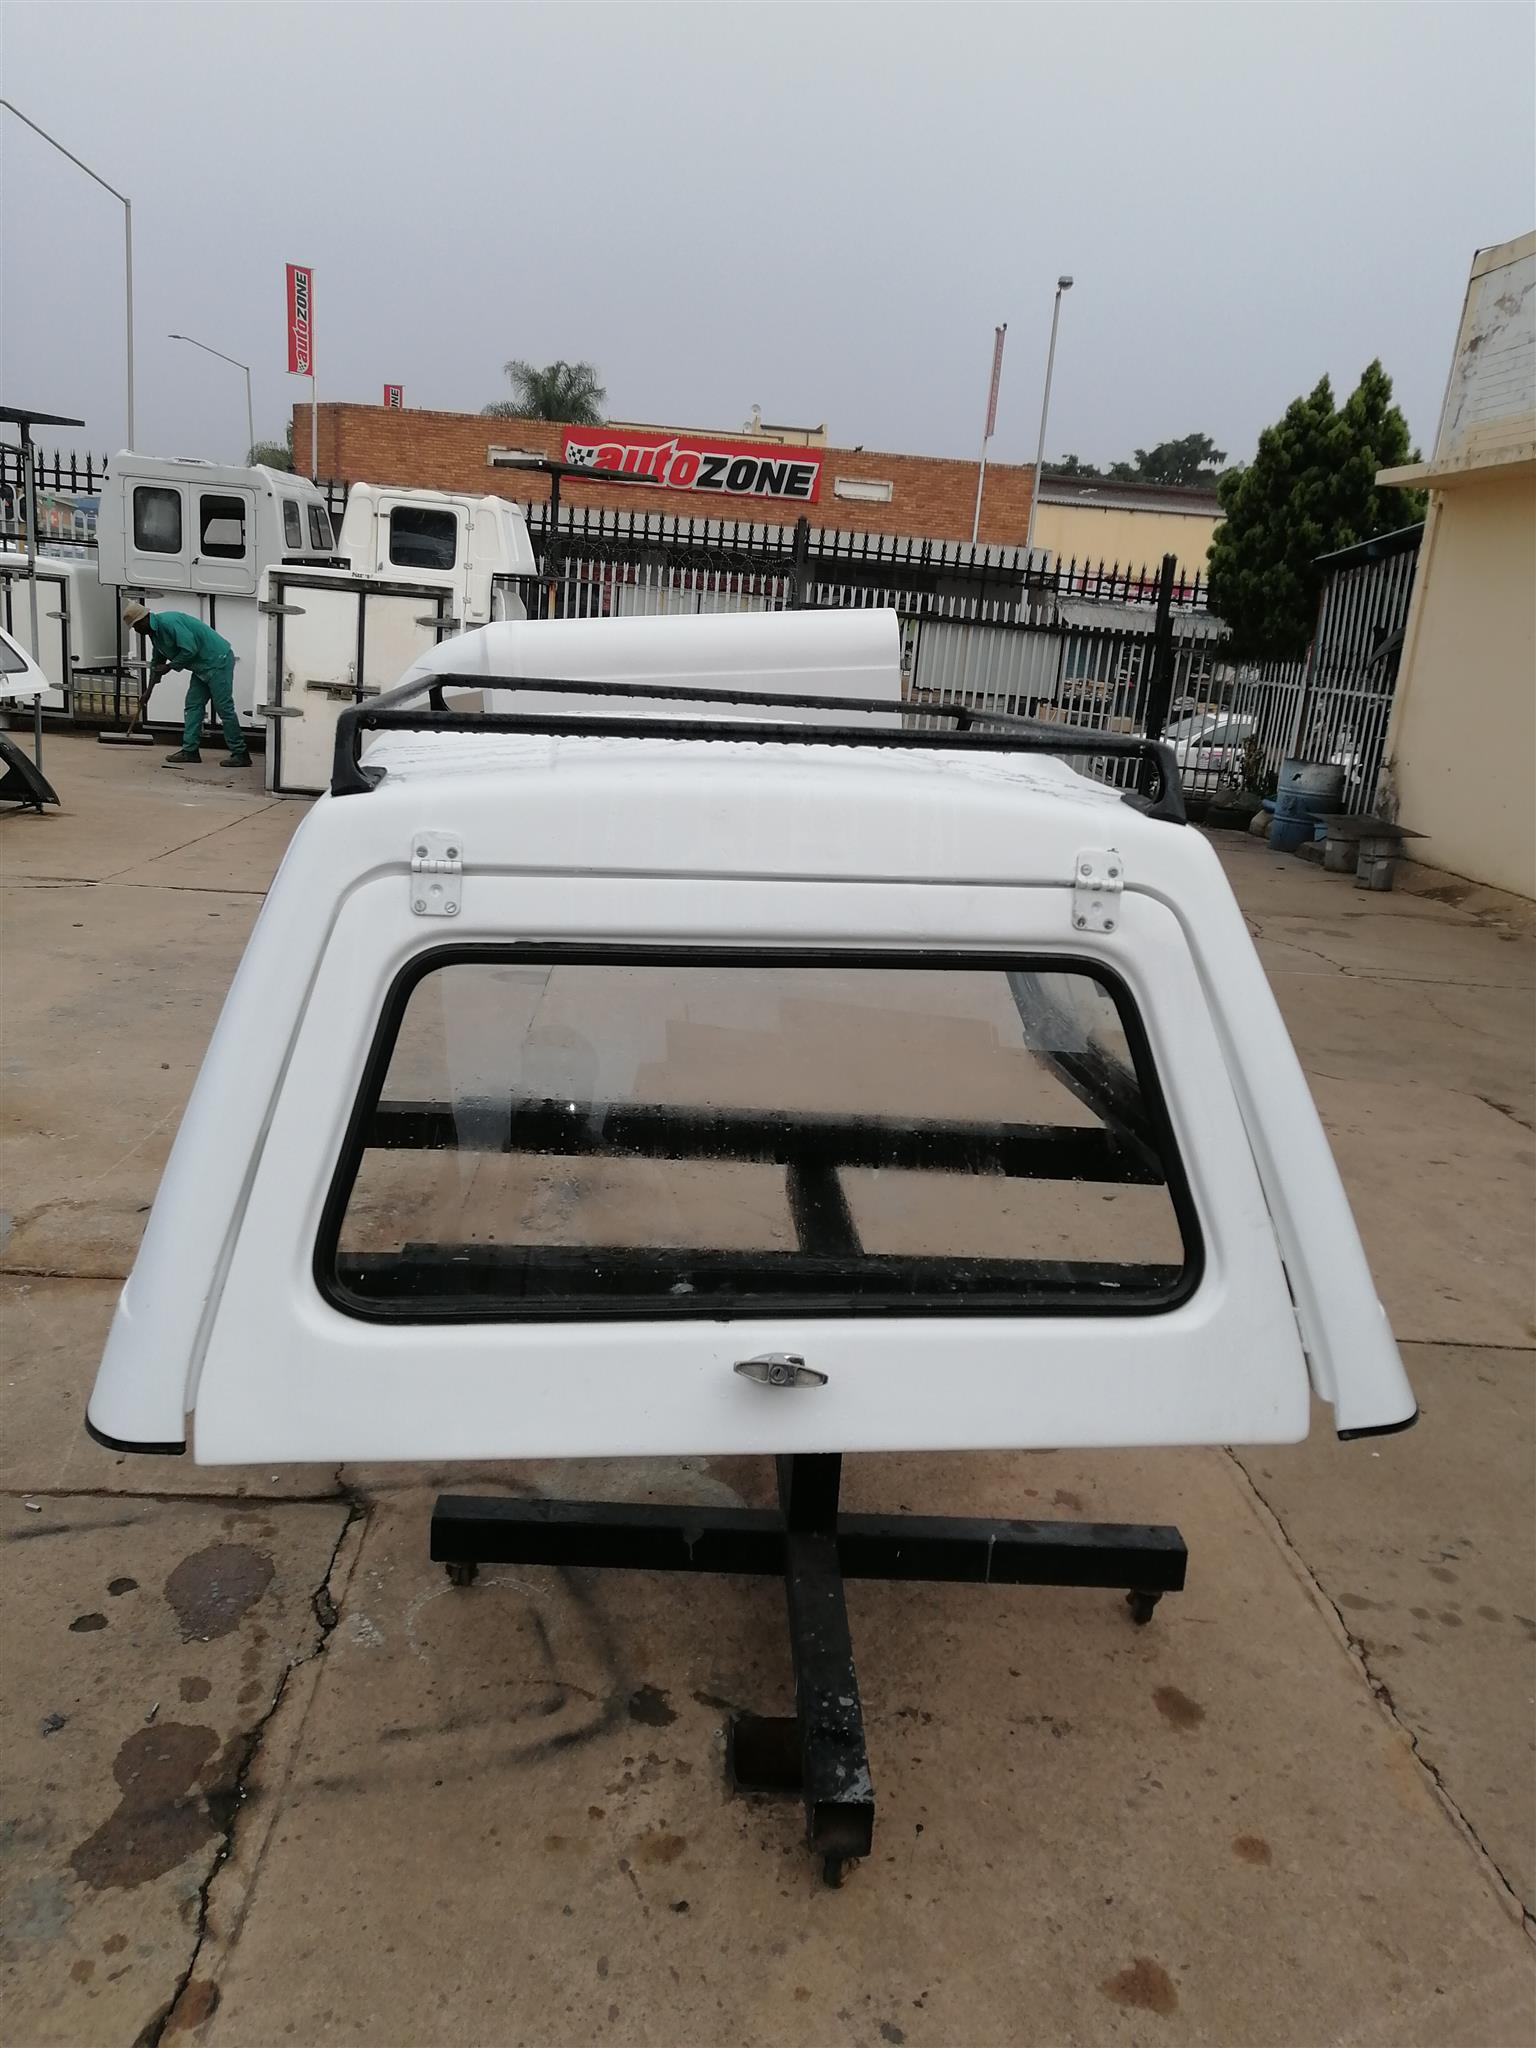 Nissan 1400 Used Hi-Liner beekman Canopy for sale!!